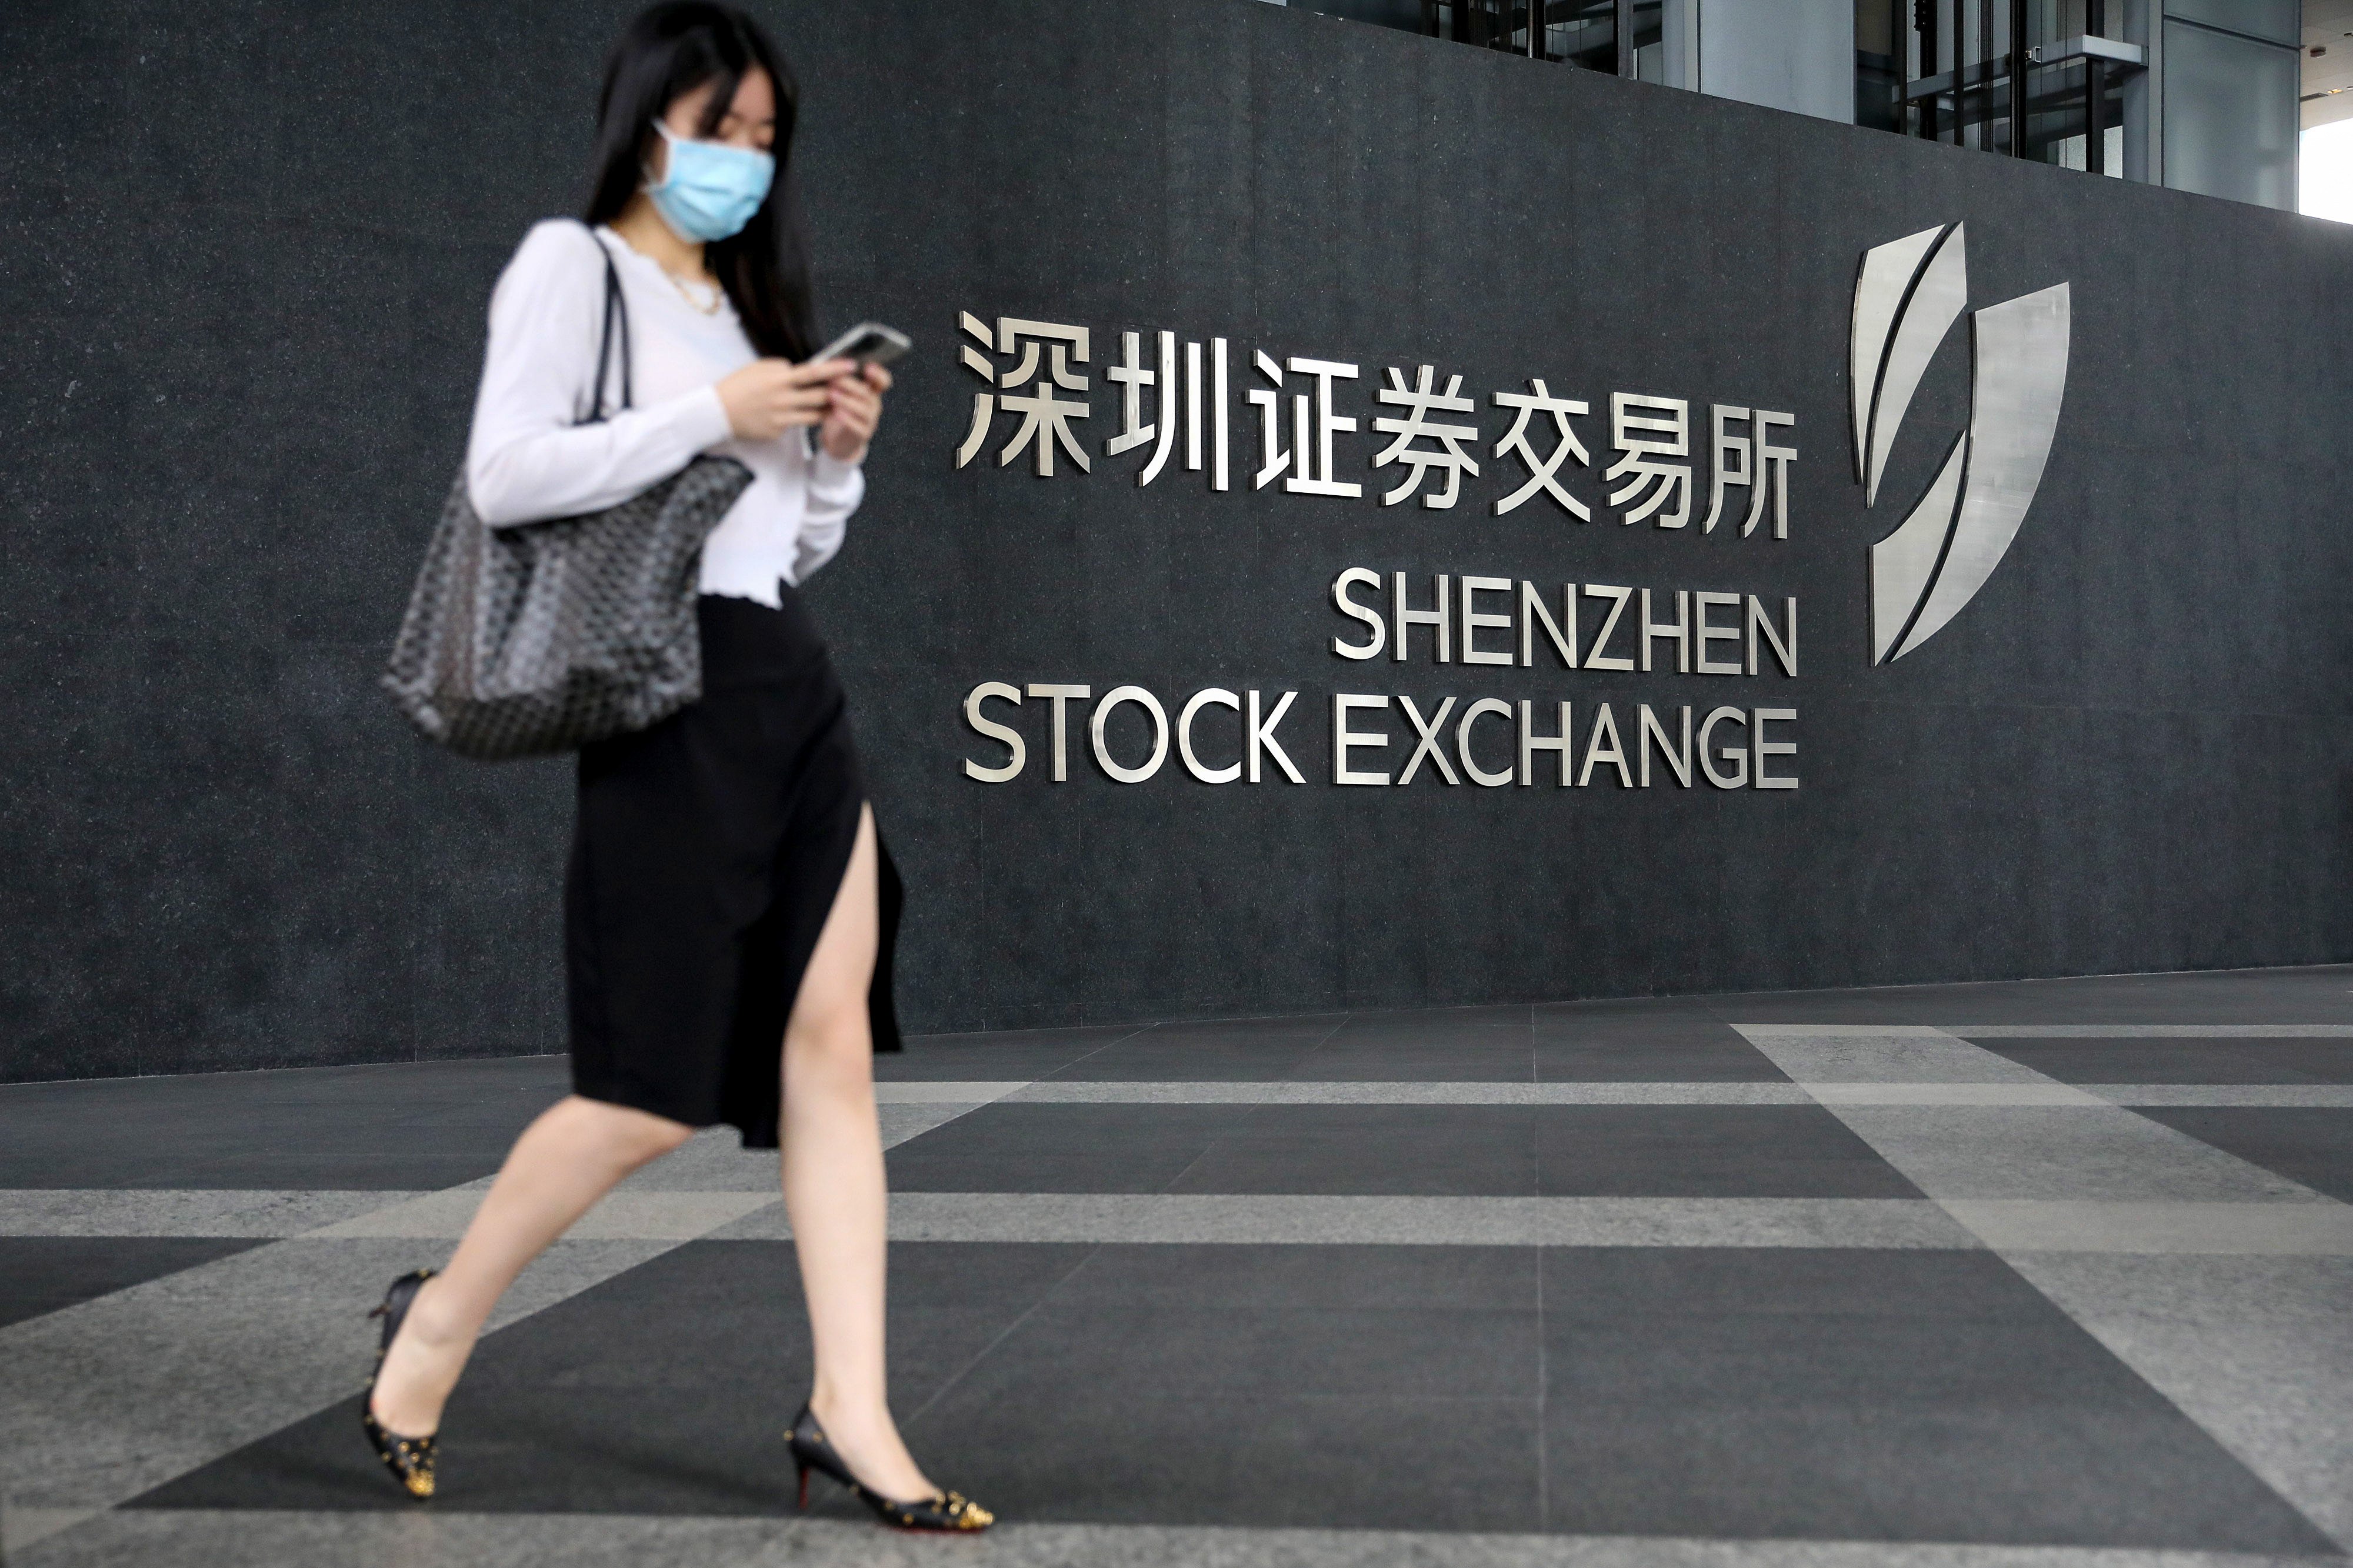 With the Inland Revenue Department ’s inclusion of the Shanghai and Shenzhen stock exchanges to its list of recognised bourses, Hong Kong companies that list their bonds on these two markets can apply for tax deduction on their interest payments in the city. Photo: VCG via Getty Images